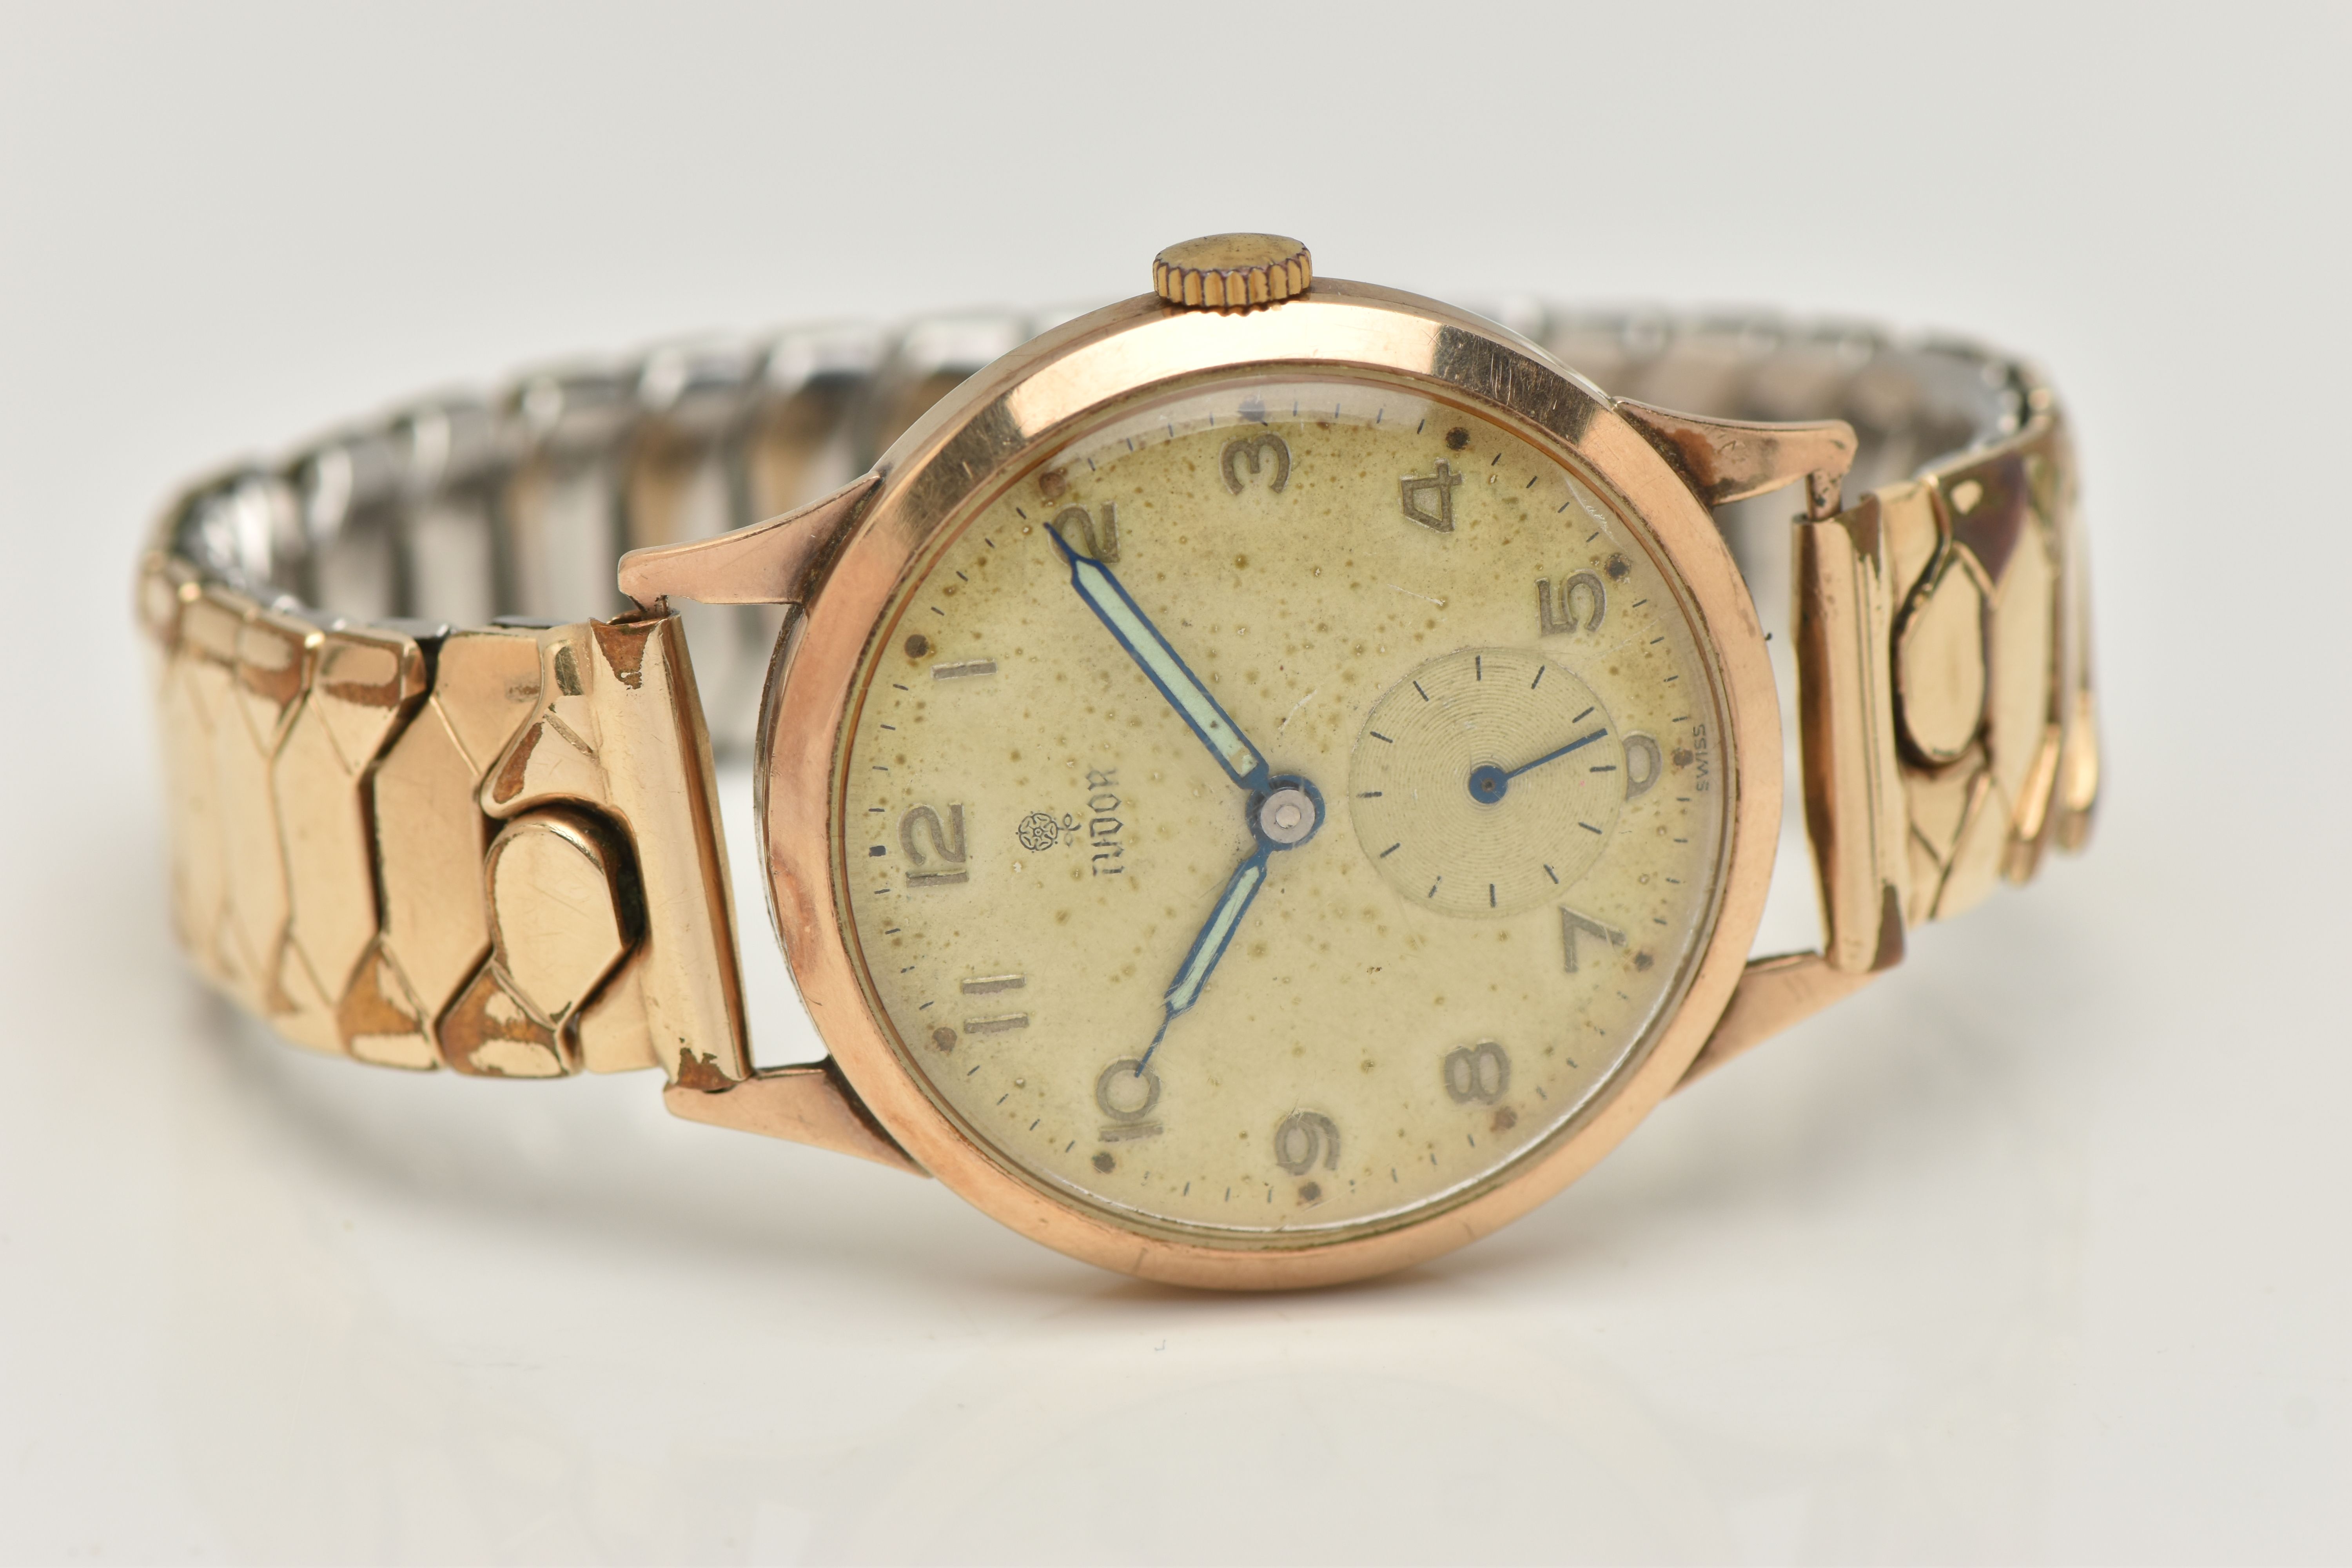 A 9CT GOLD 'TUDOR' WRISTWATCH, hand wound movement, round dial signed 'Tudor', Arabic numerals, - Image 4 of 6